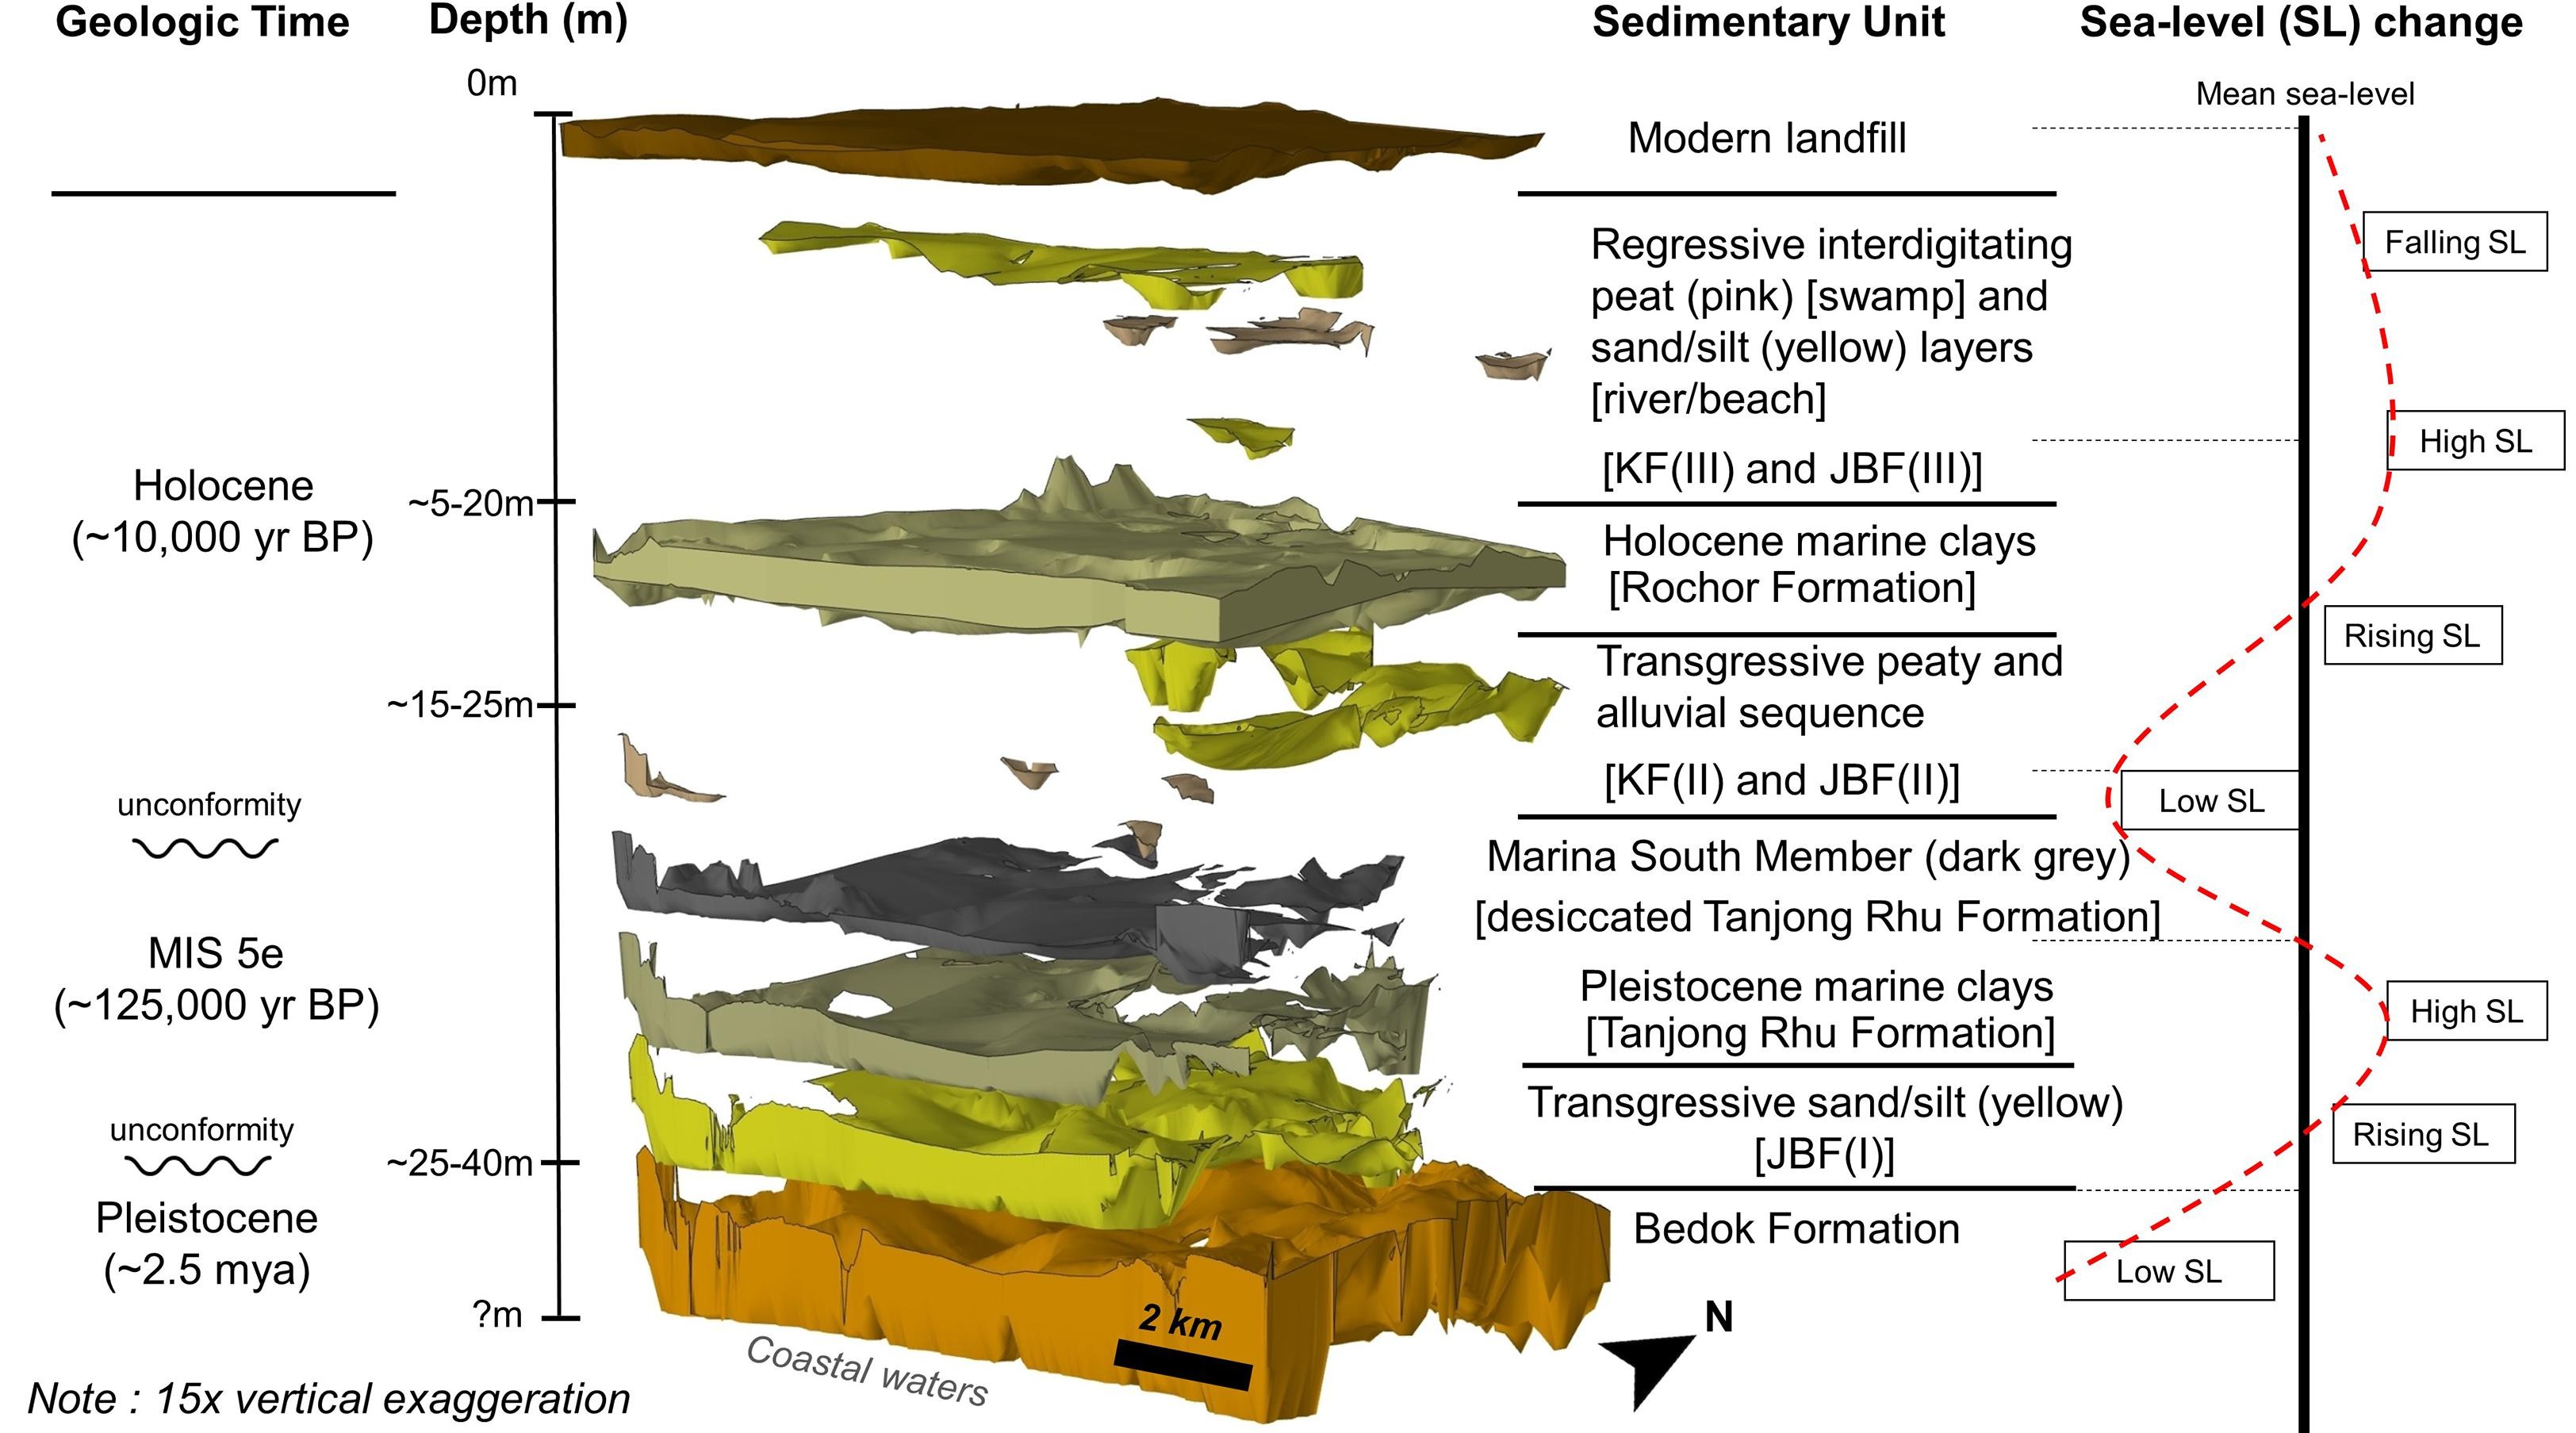 3-dimensional model (exploded) showing the Quaternary (last 2.6 million years) geological units found in the Kallang River Basin (Source: Stephen Chua/Earth Observatory of Singapore)